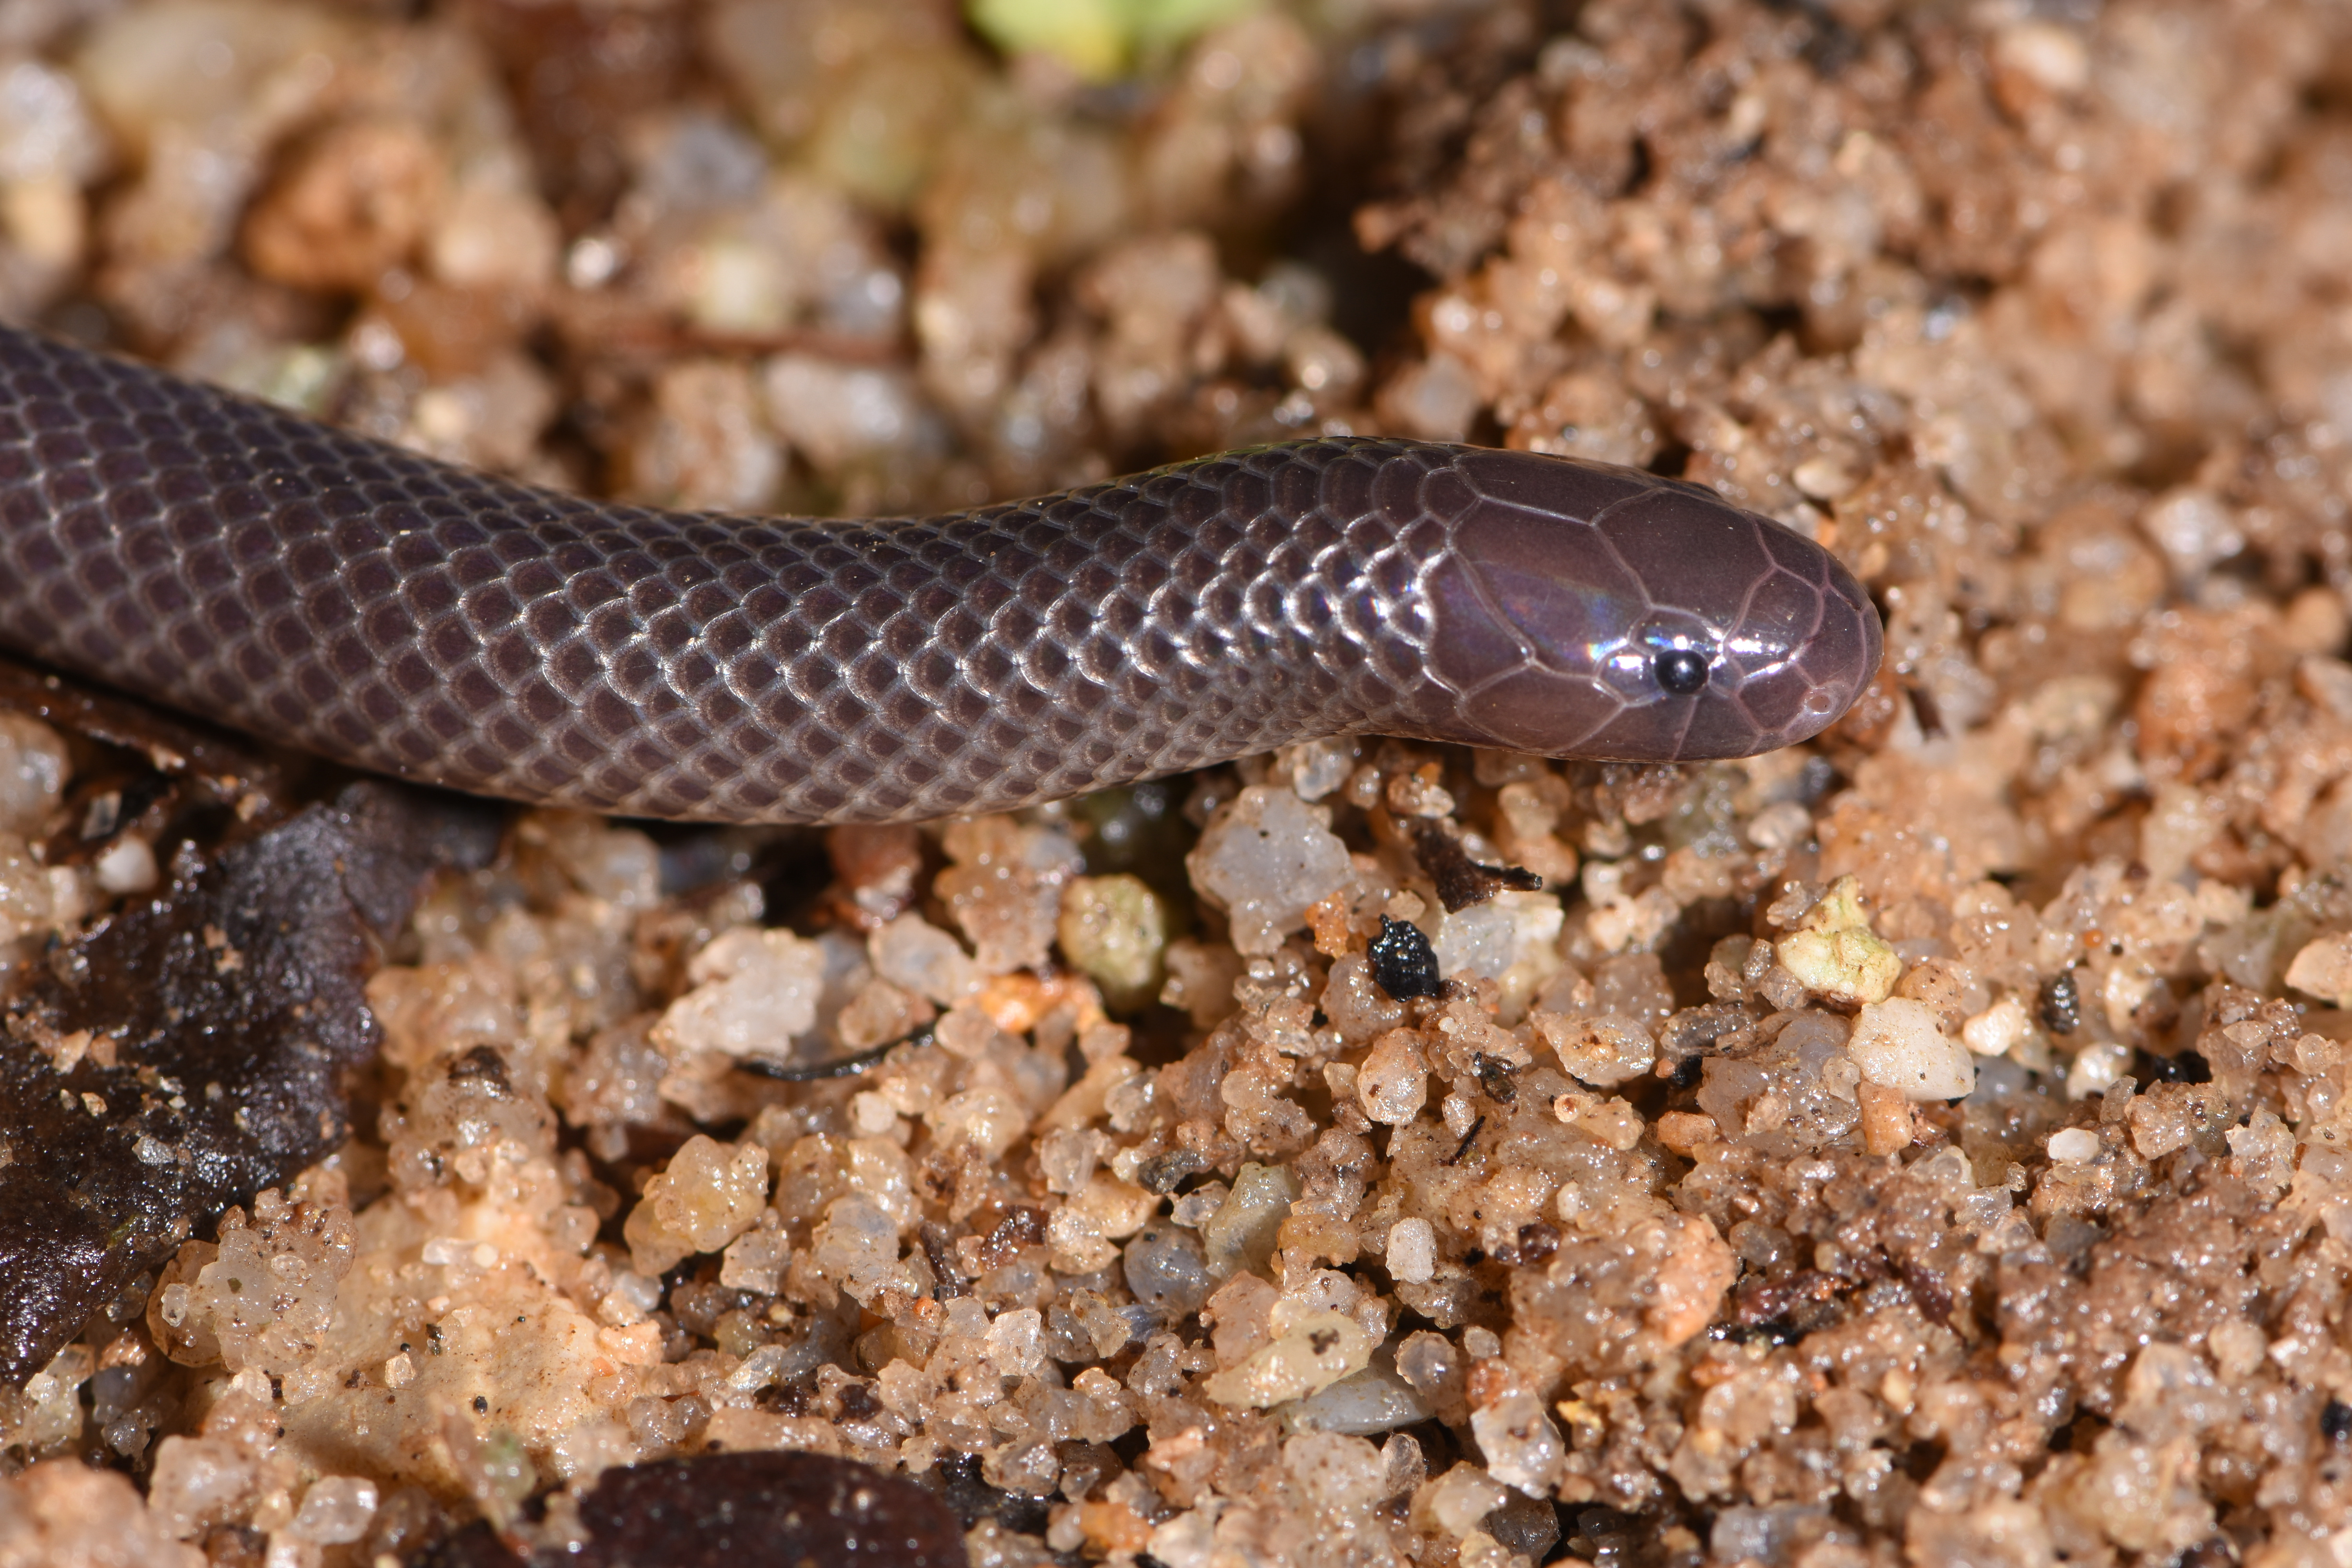 Close up of the the First Discovered Specimen of the Branch's Stiletto Snake